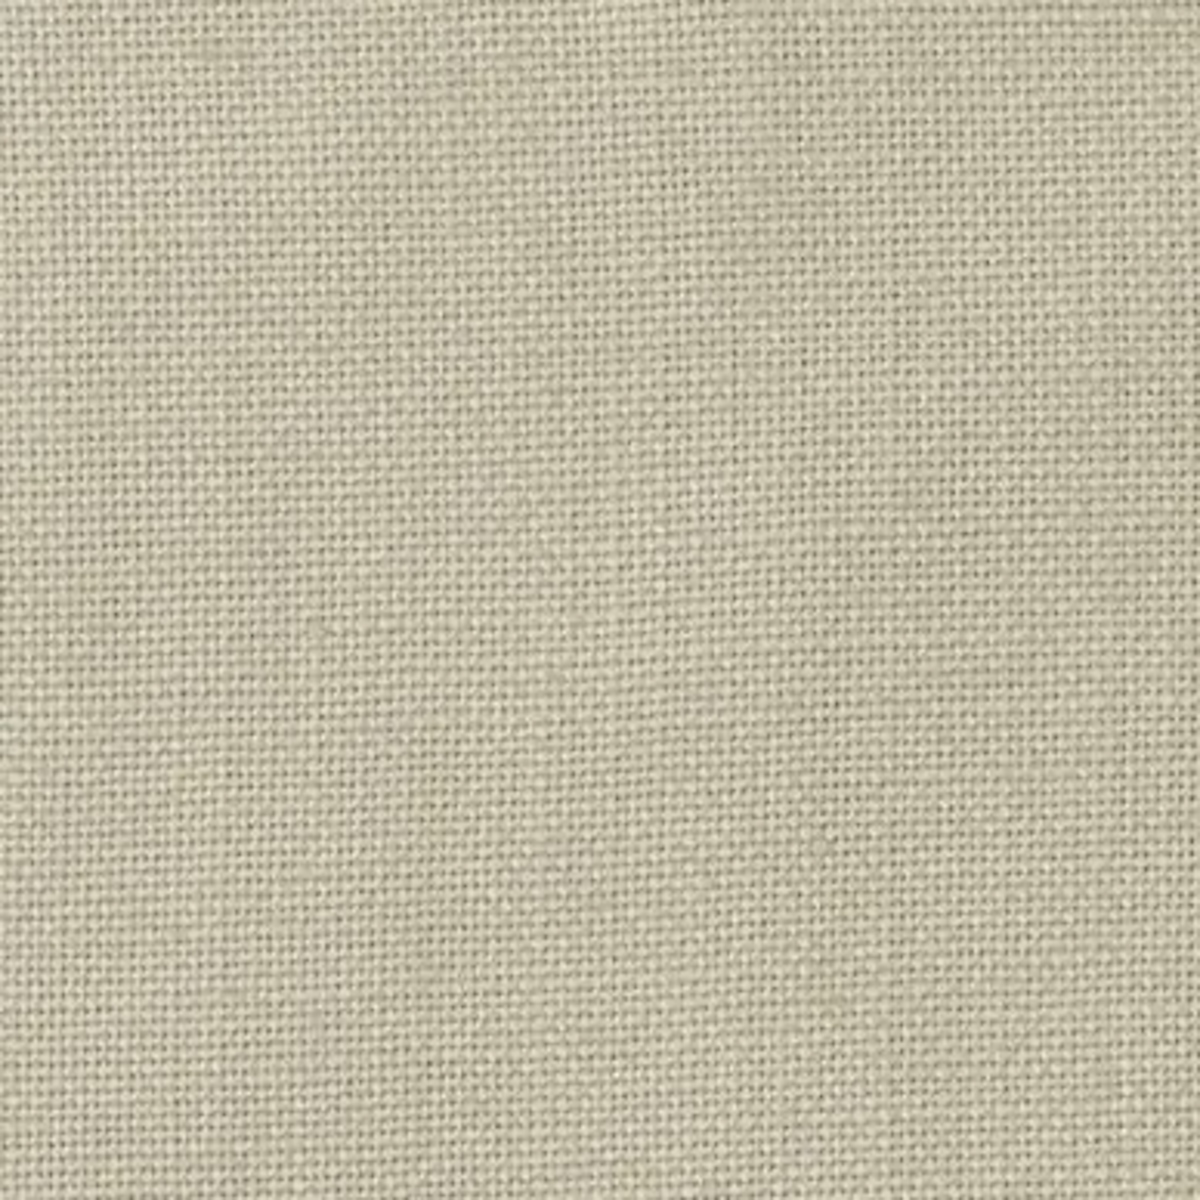 Linen upholstery textile swatch